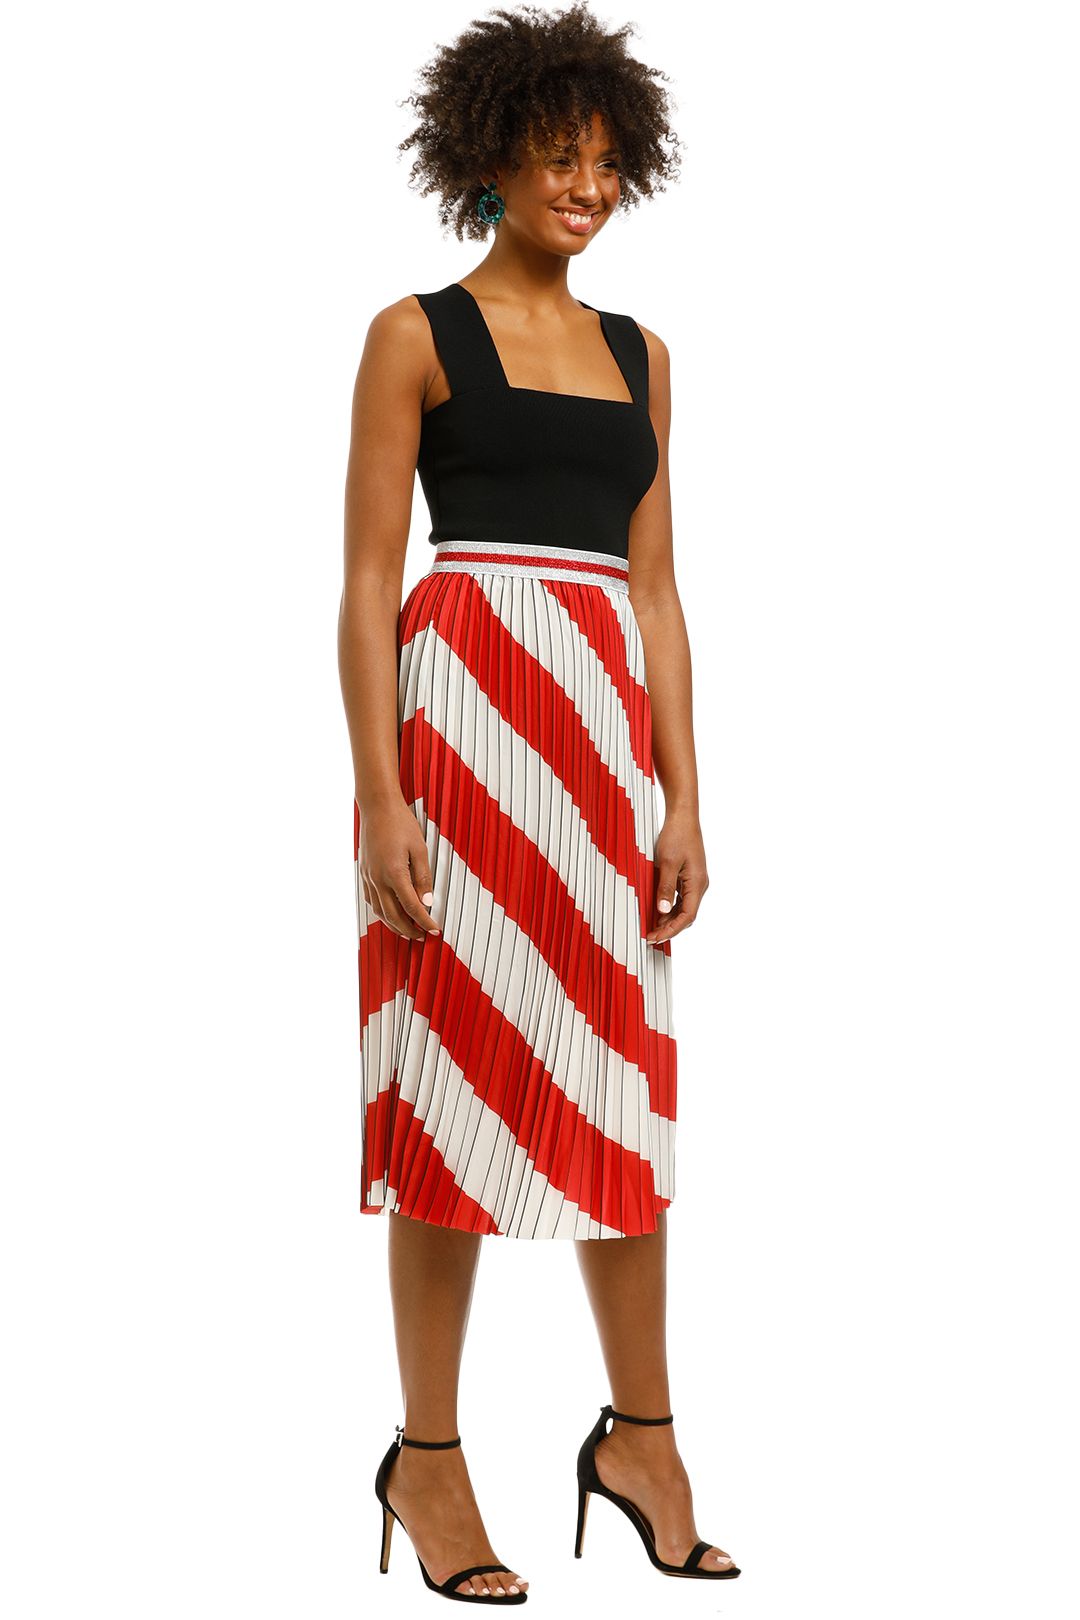 COOP-By-Trelise-Cooper-Spin-Me-Round-Skirt-Pink-White-Stripe-Side